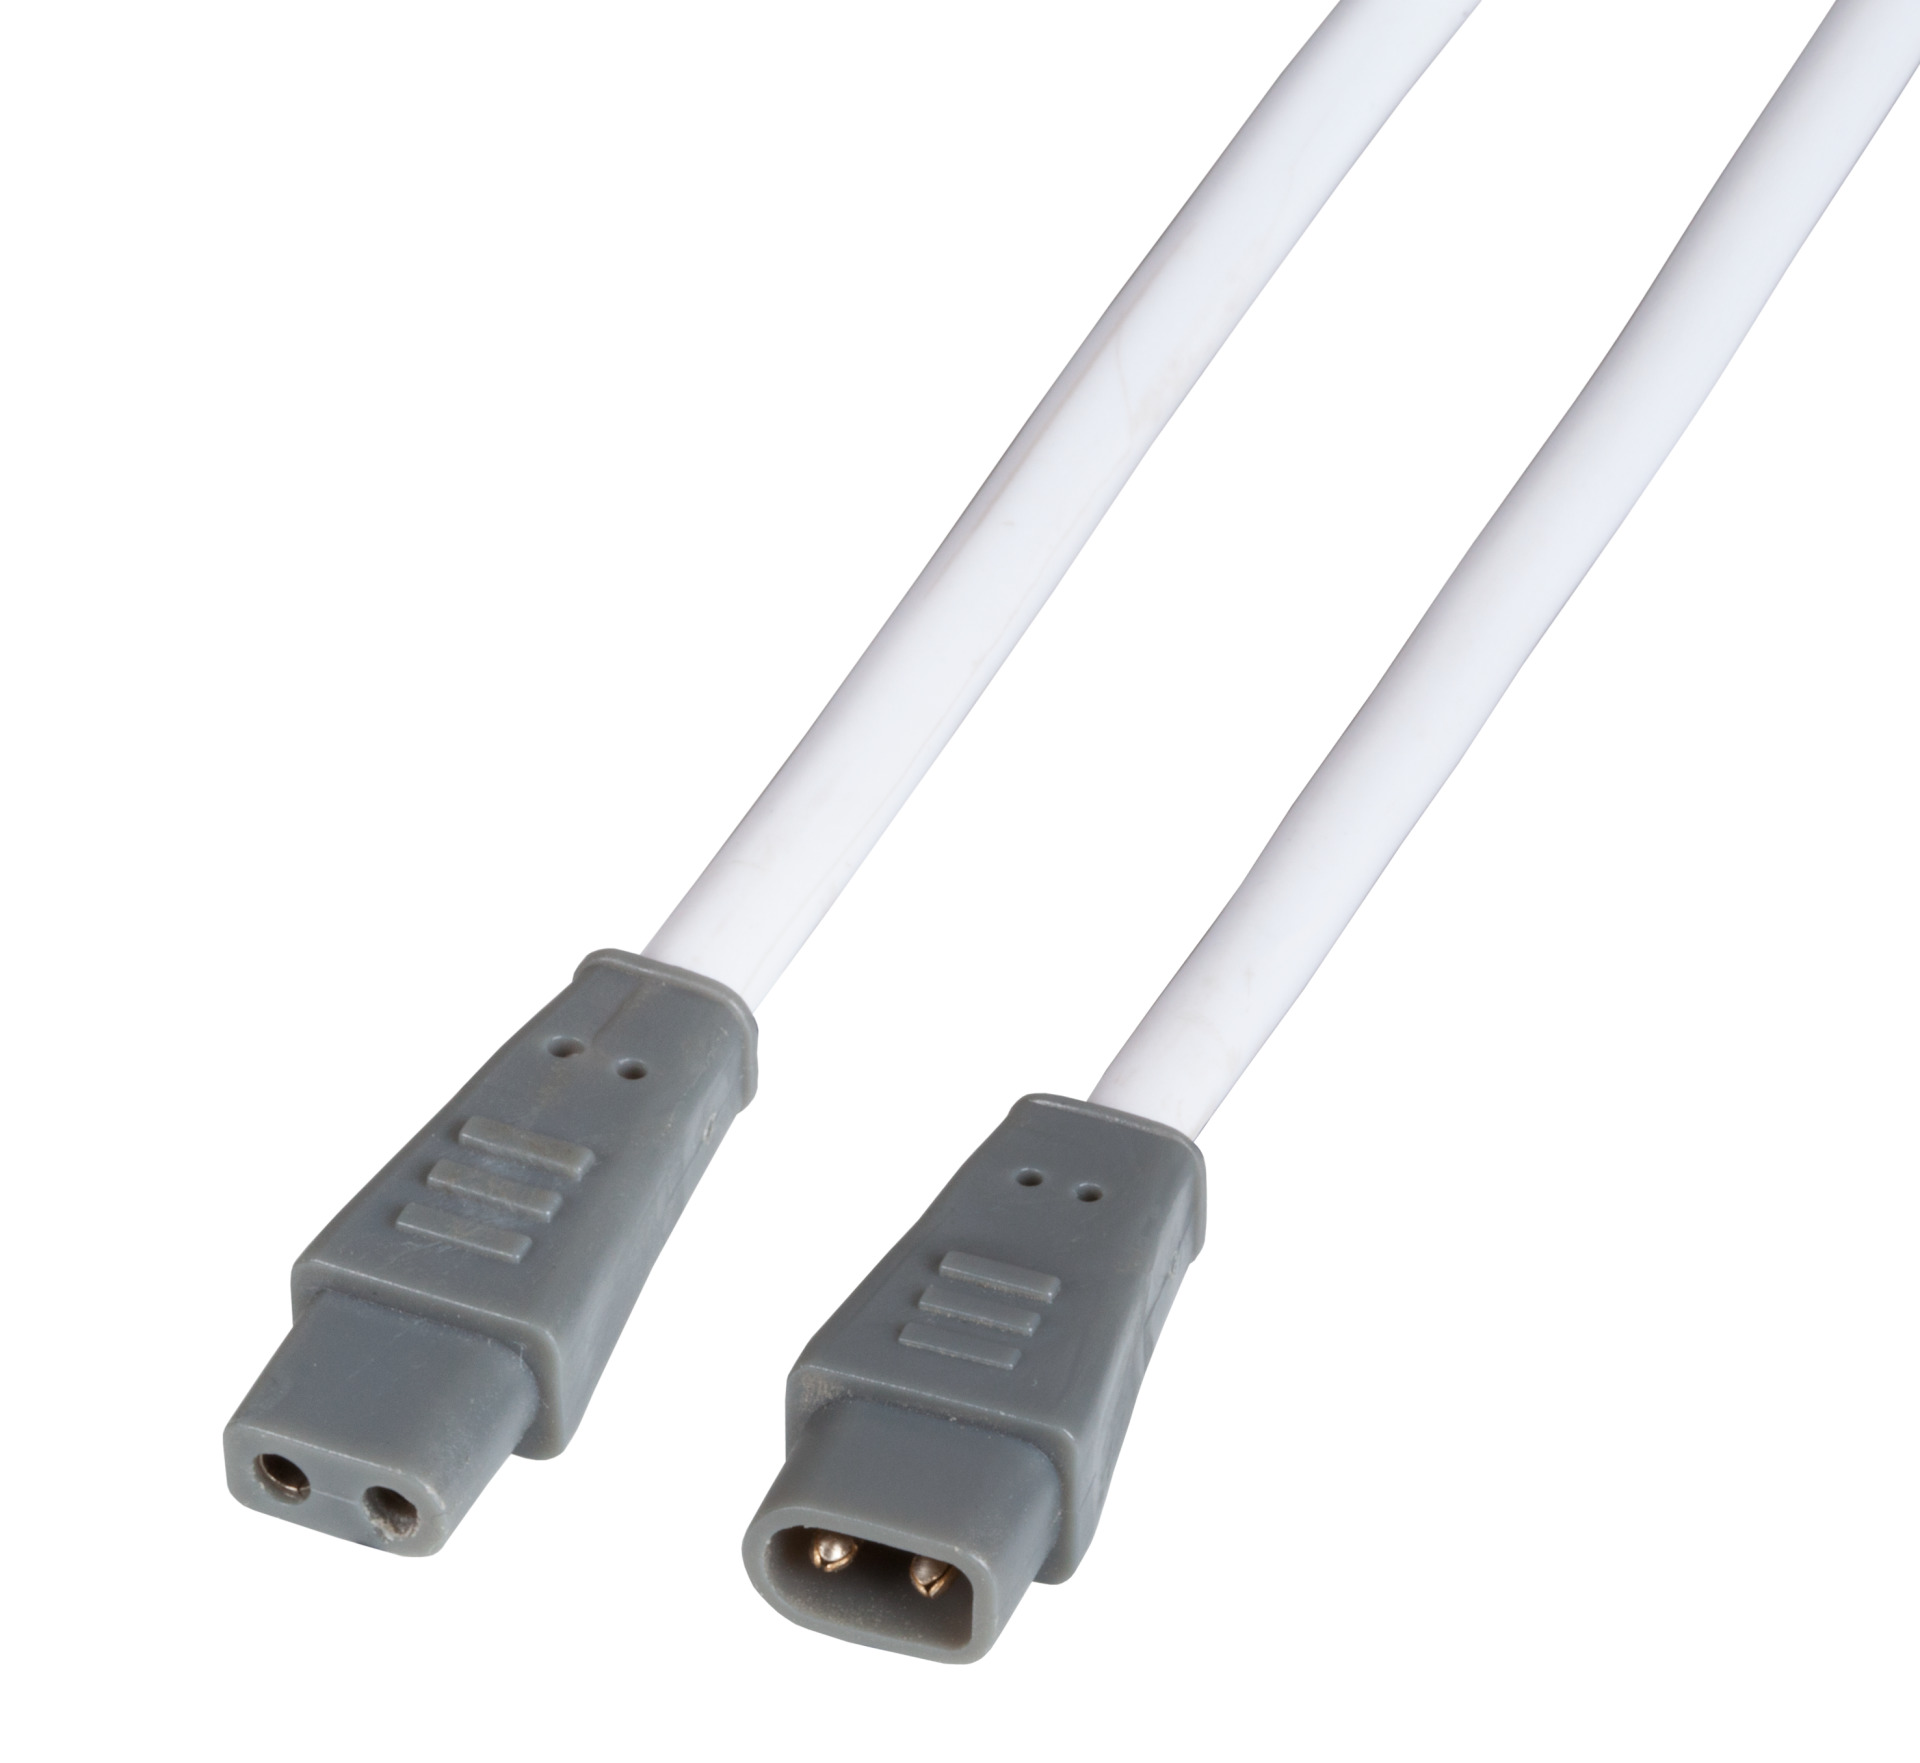 Cascading Cable 1.25 m, White, for LED Unit 698026.x